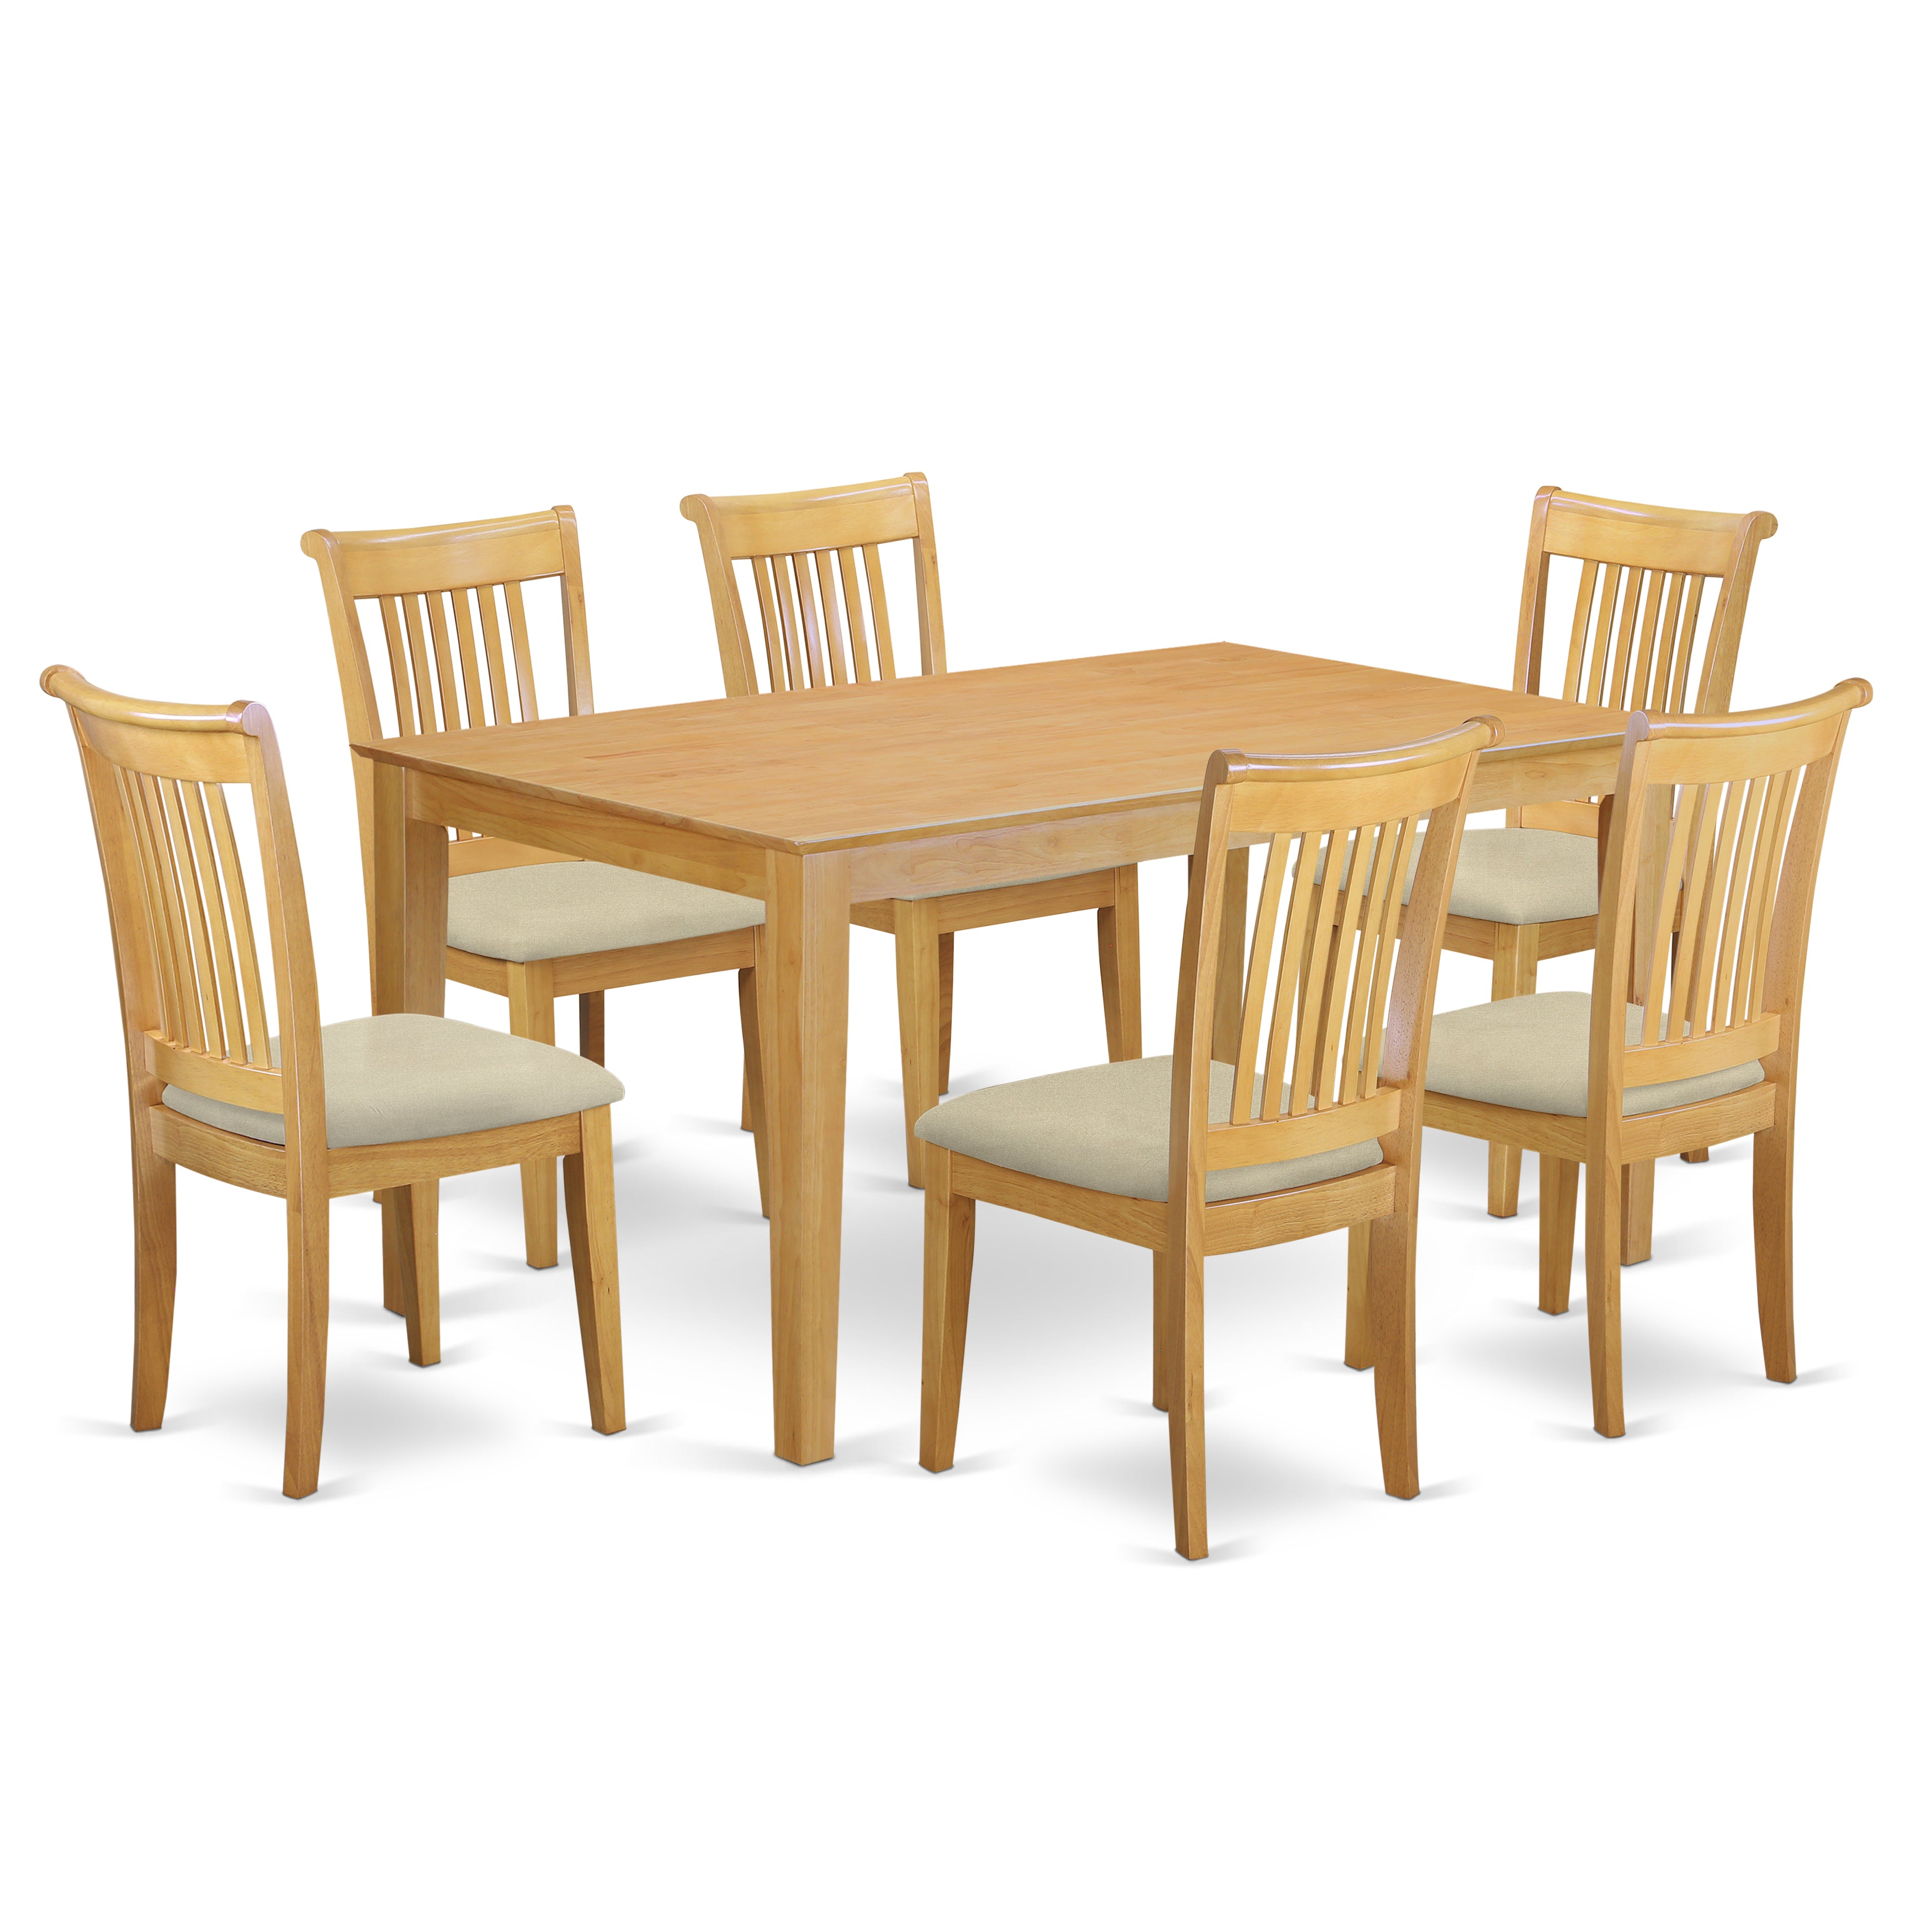 CAPO7-OAK-C 7 Piece dining table set- Solid Top dining room table and 6 Cushion Seat dining chairs